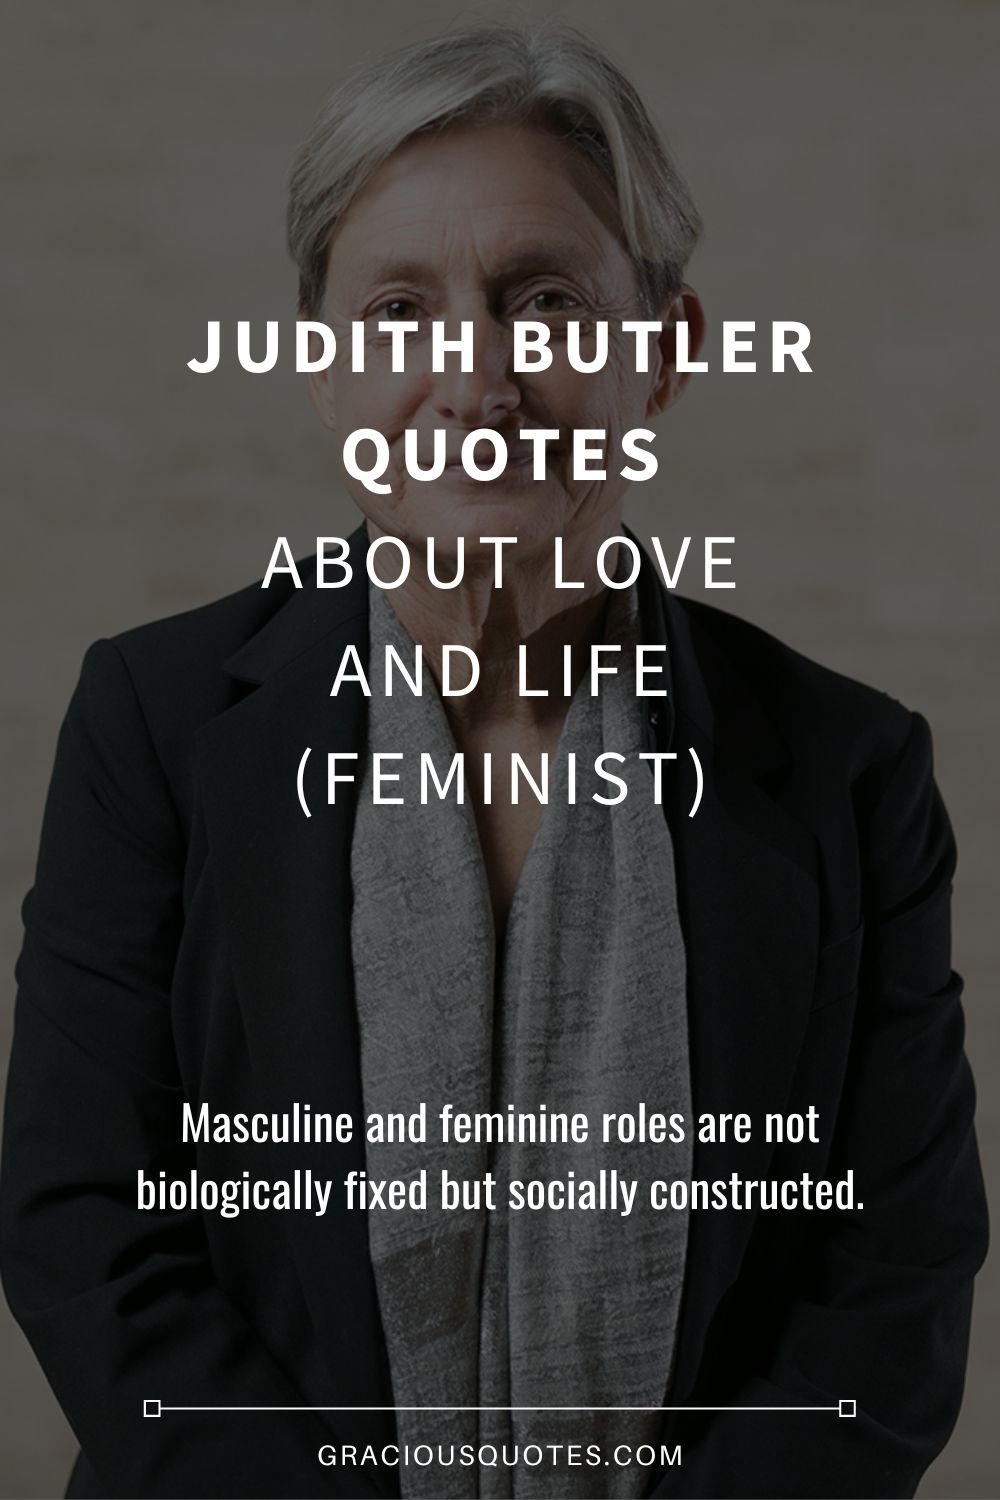 Judith Butler Quotes About Love and Life (FEMINIST) - Gracious Quotes